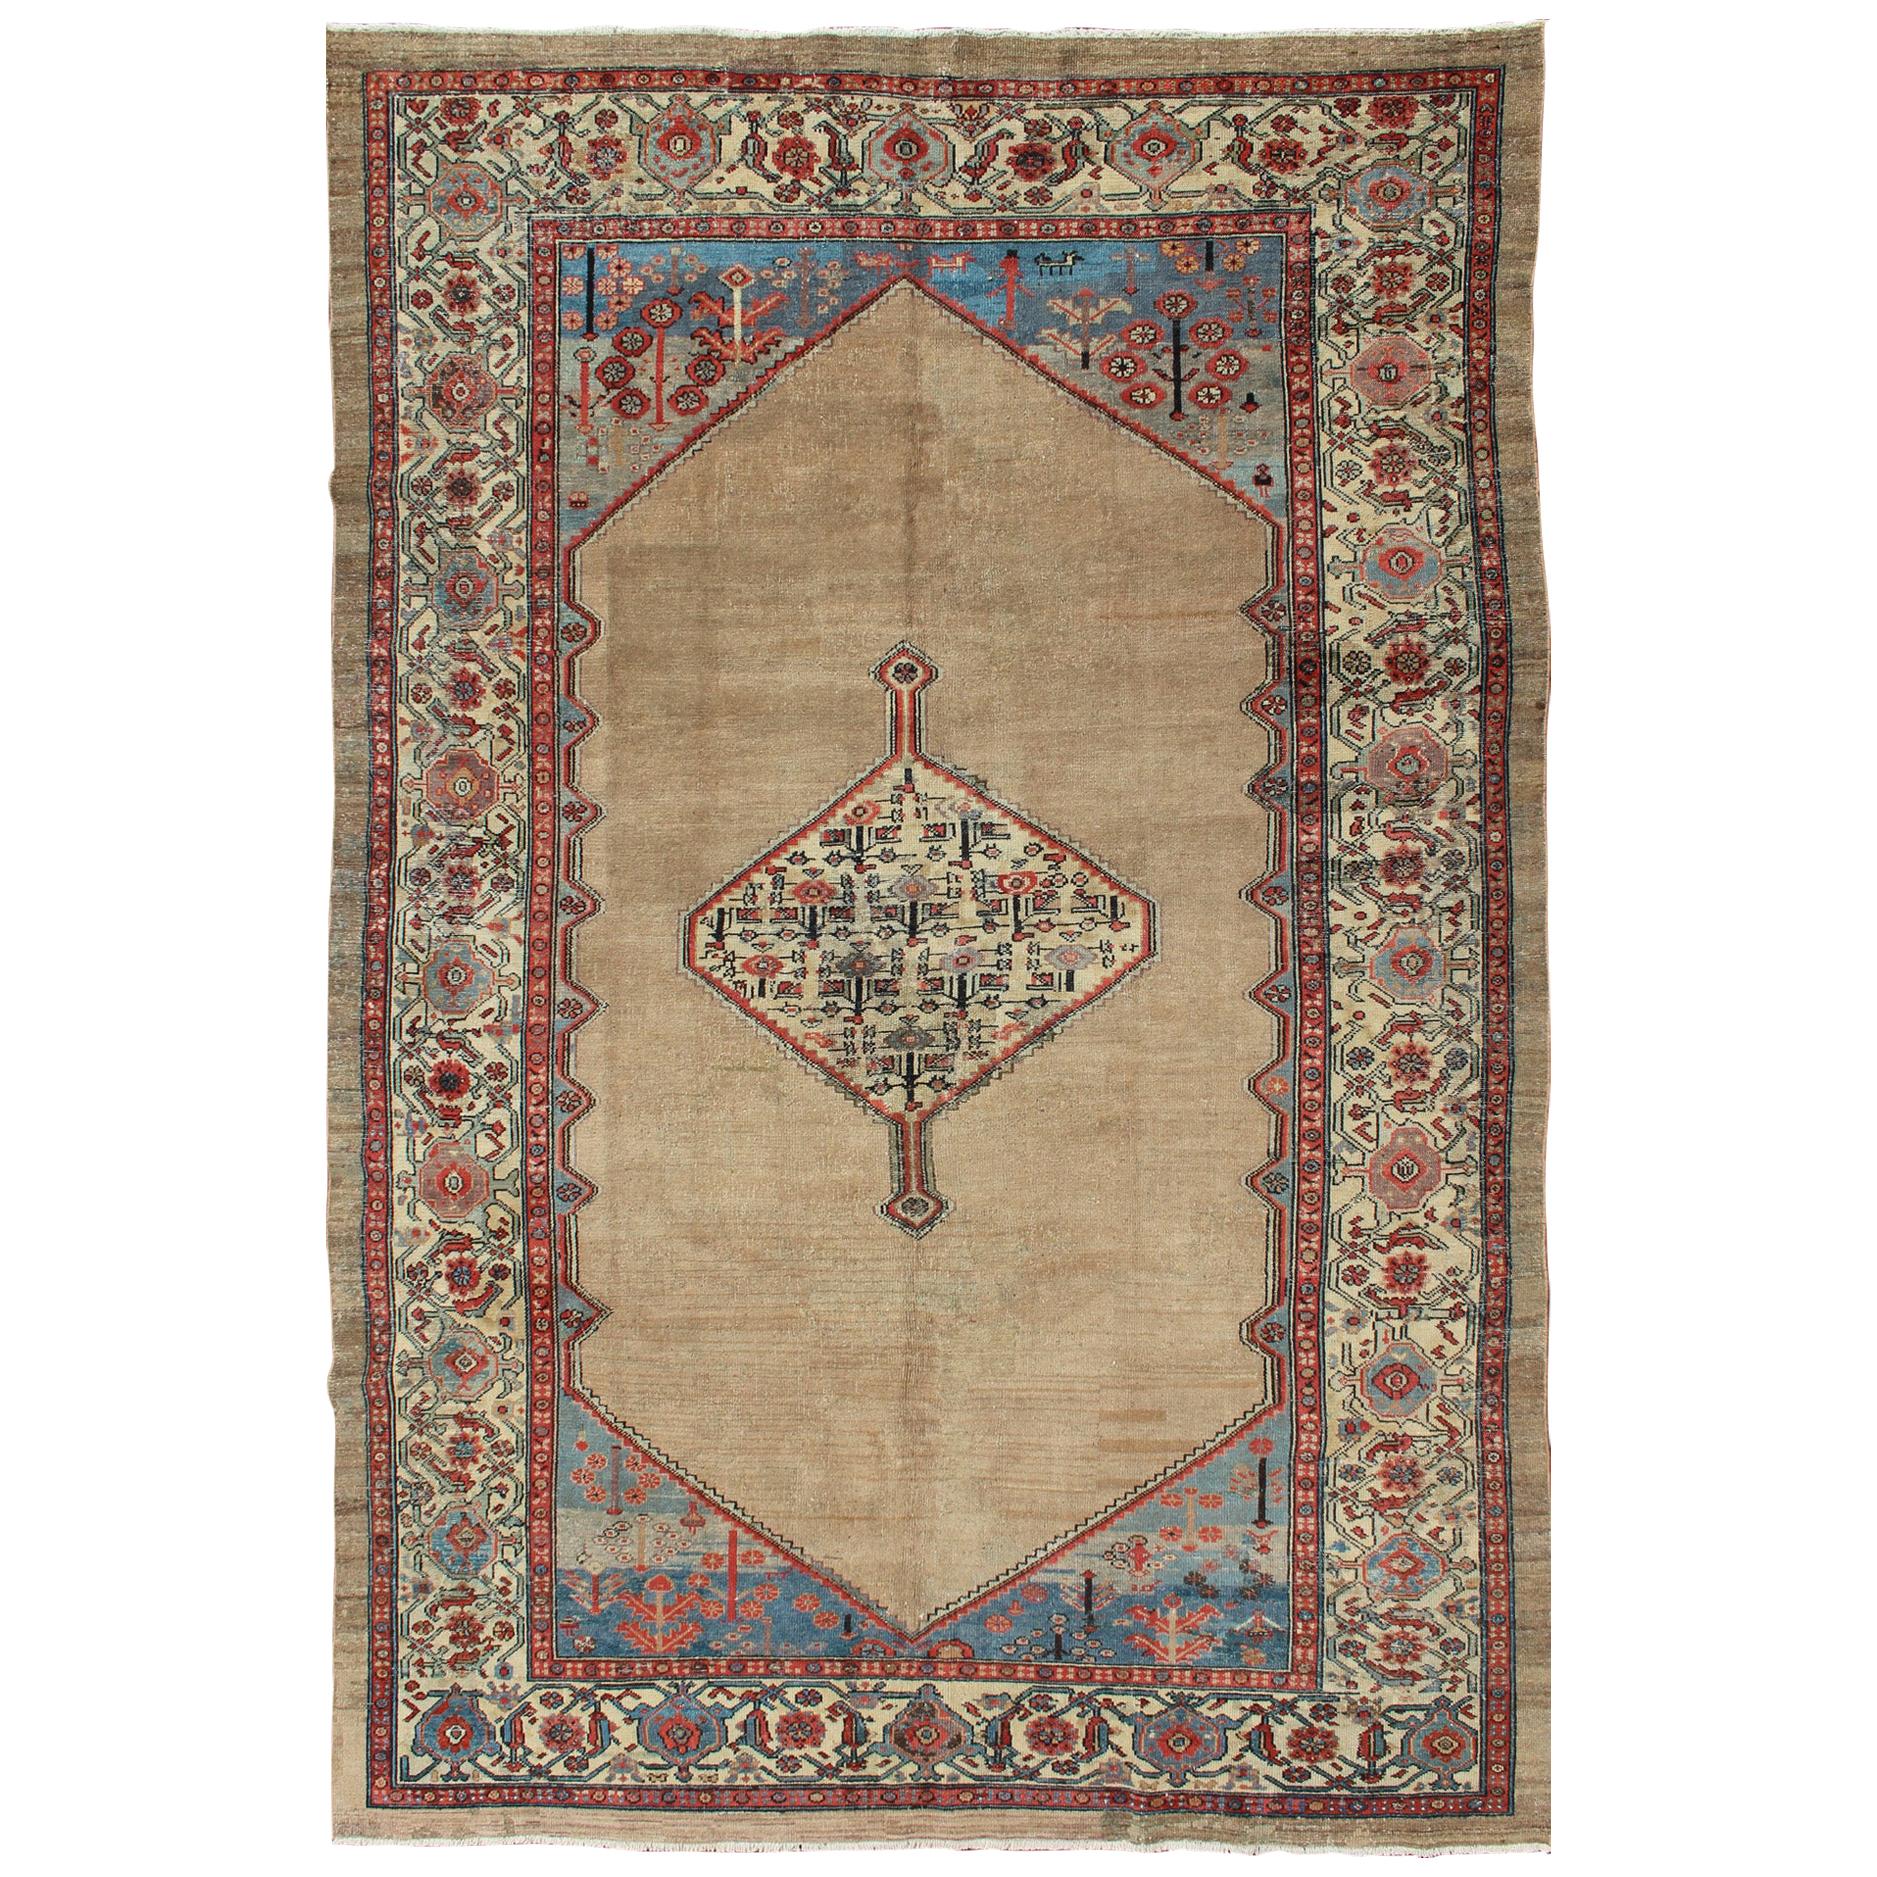 Camel Hair Antique Persian Serab Rug in Camel Color Background, Blue, Salmon 